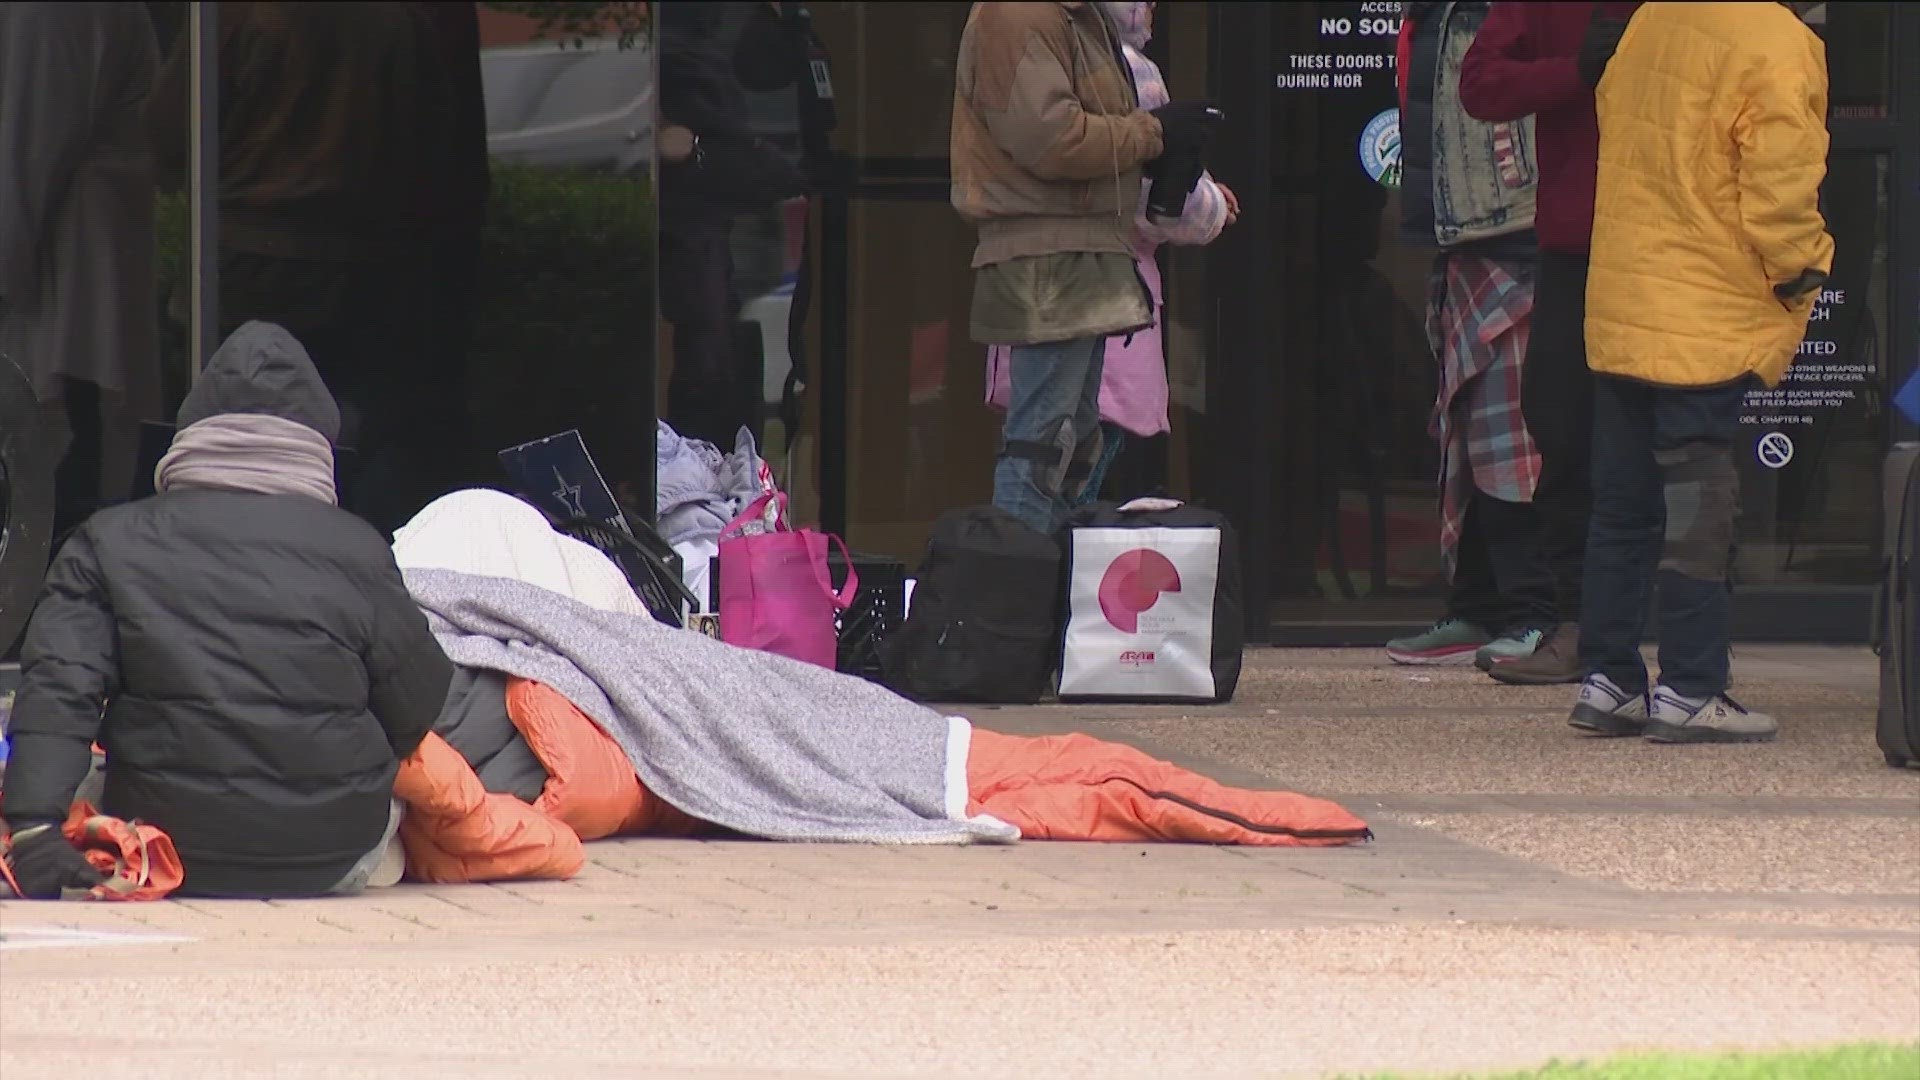 People with no warm place to go are seeking shelter. The City of Austin opened the One Texas Center for those needing a warm place to stay.